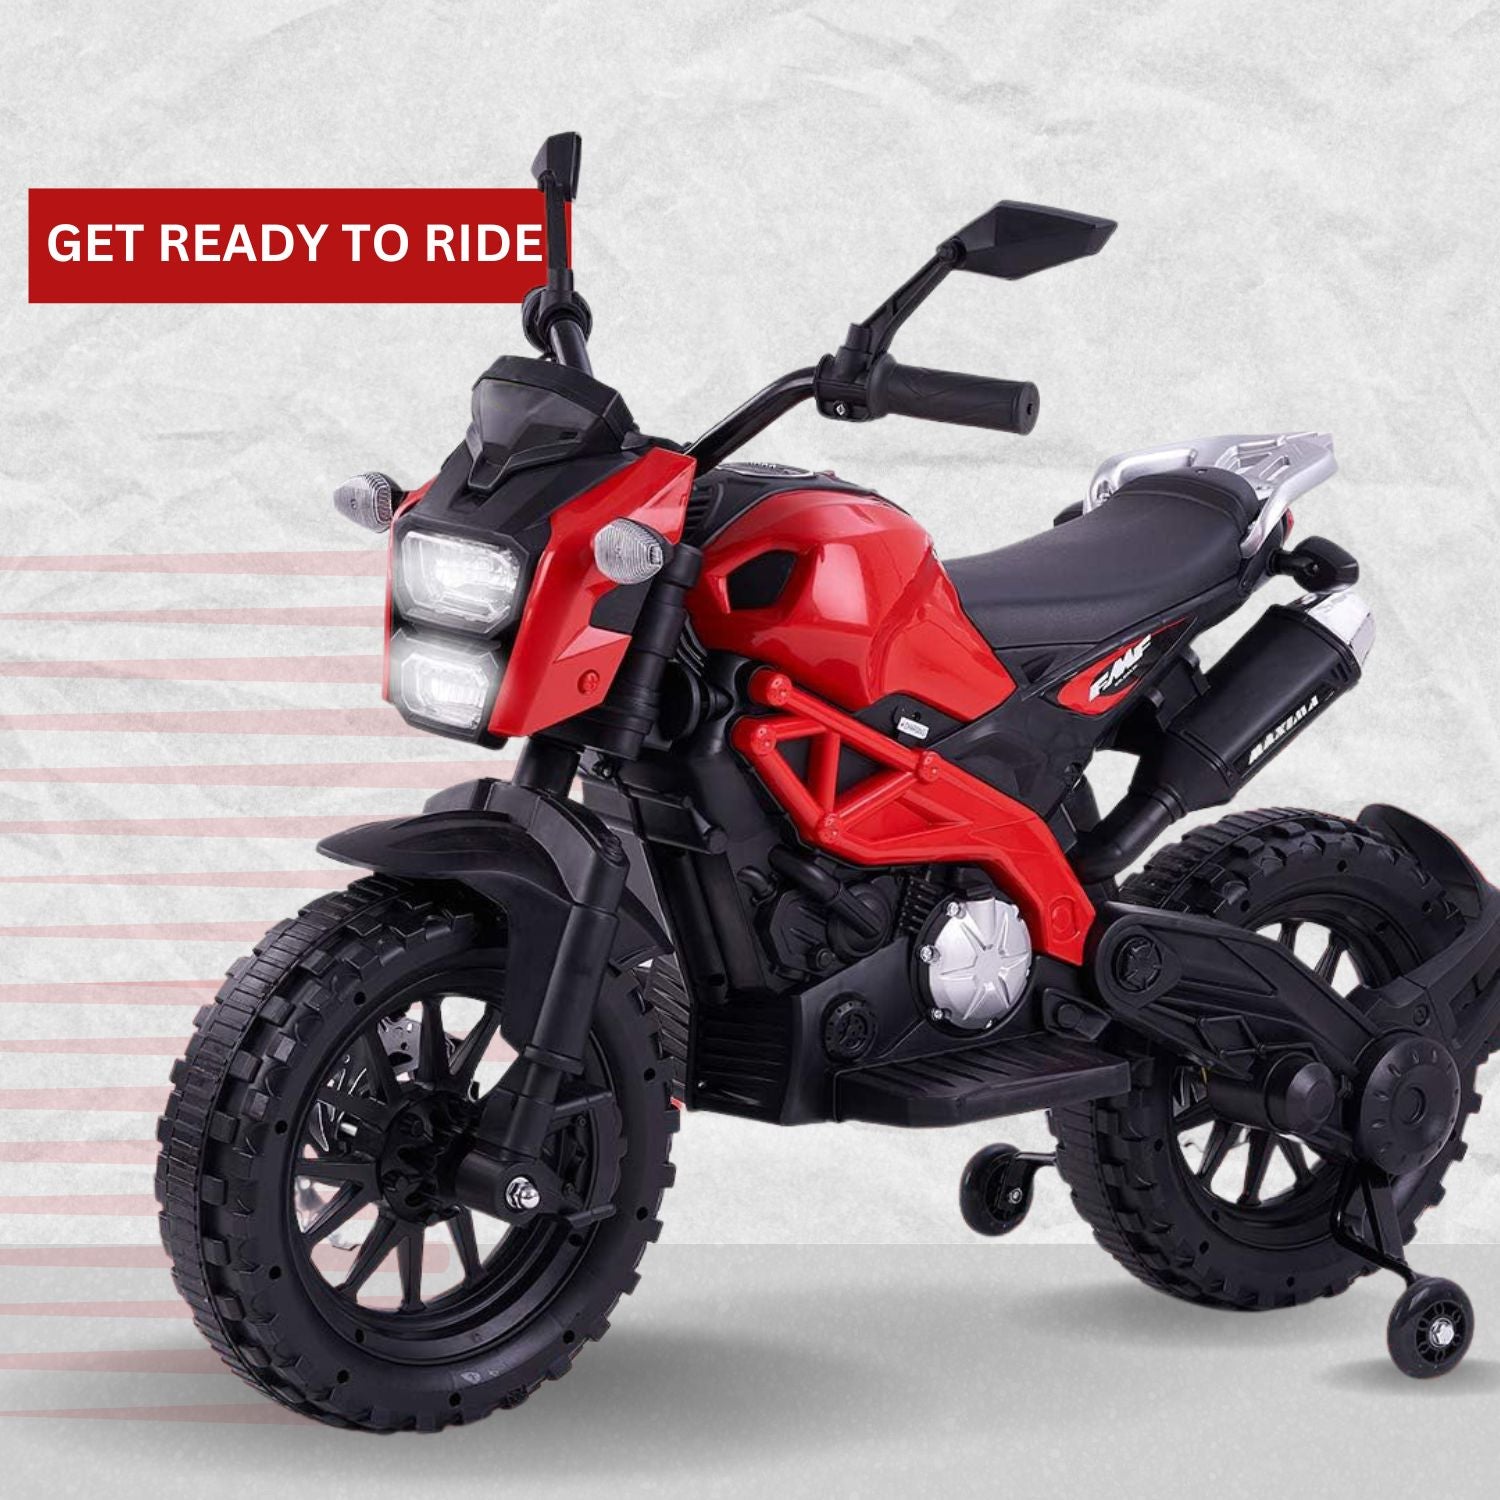 Baby Moo Electric Ride-on Bike for Kids | Battery-Powered Toy with LED Lights, Music, and USB Port | Battery Operated Bike - Red - Baby Moo